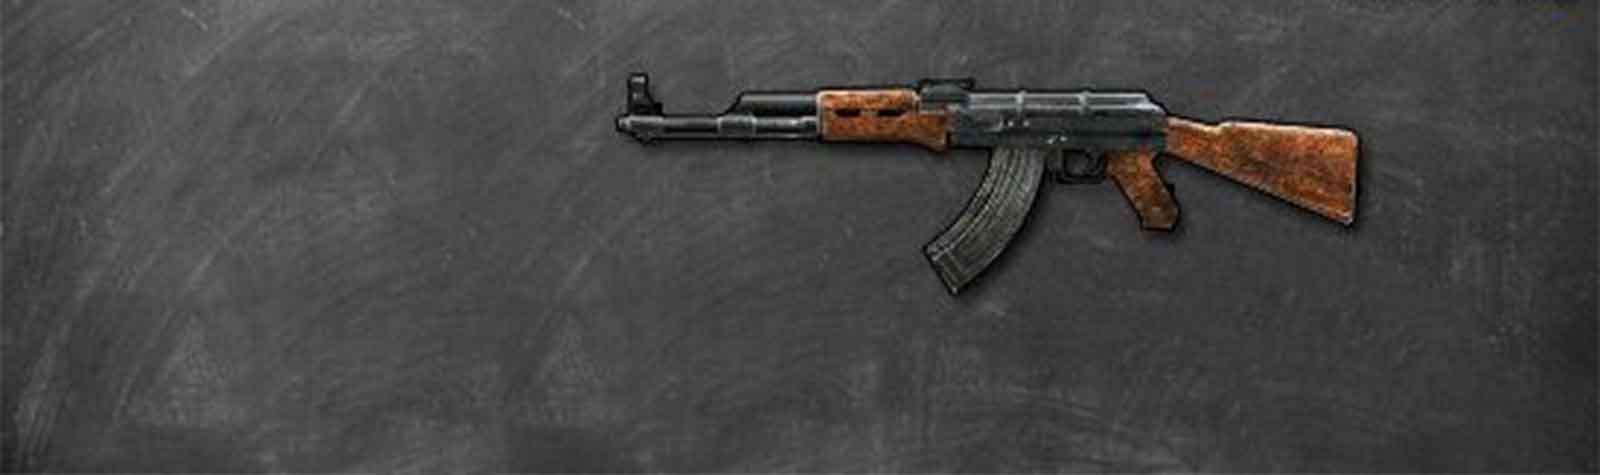 The Best Airsoft AK47 : Top Rated Reviews and Buying Guide